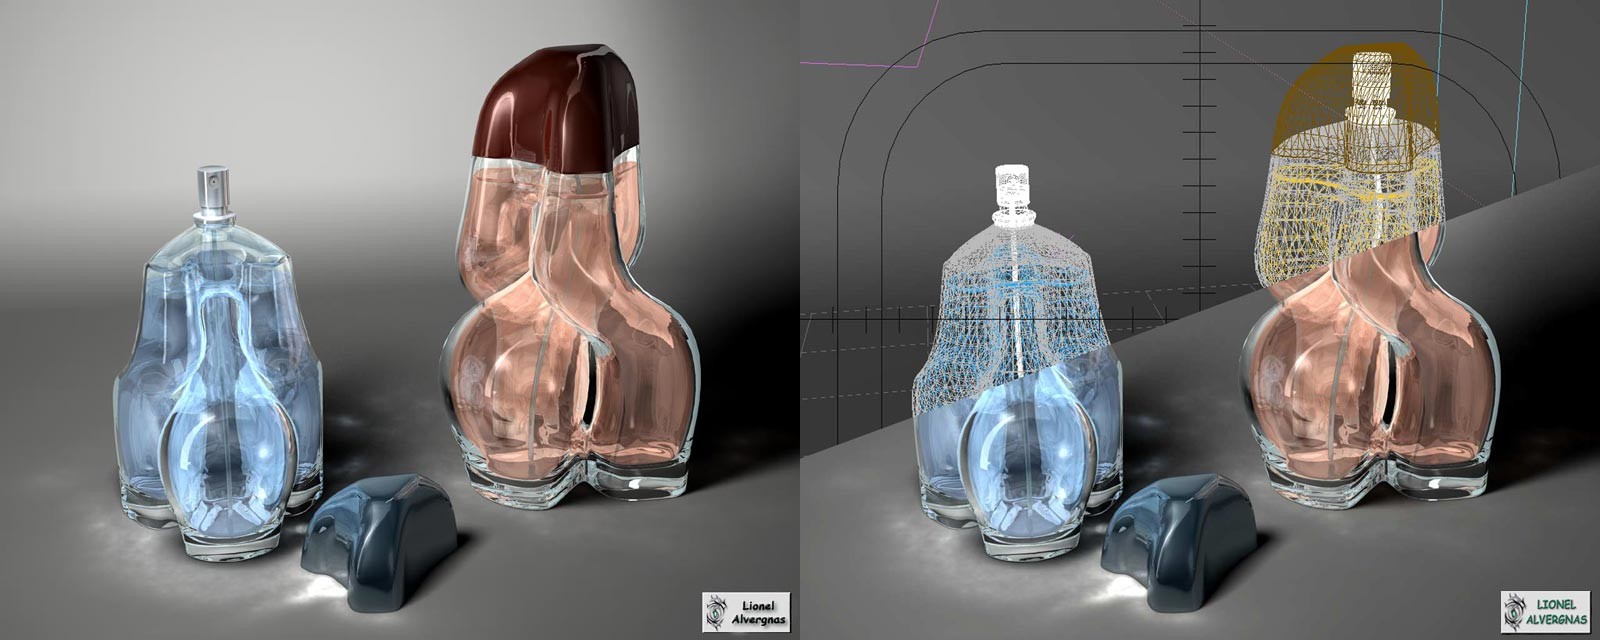 Perfume bottle concept, just for fun!